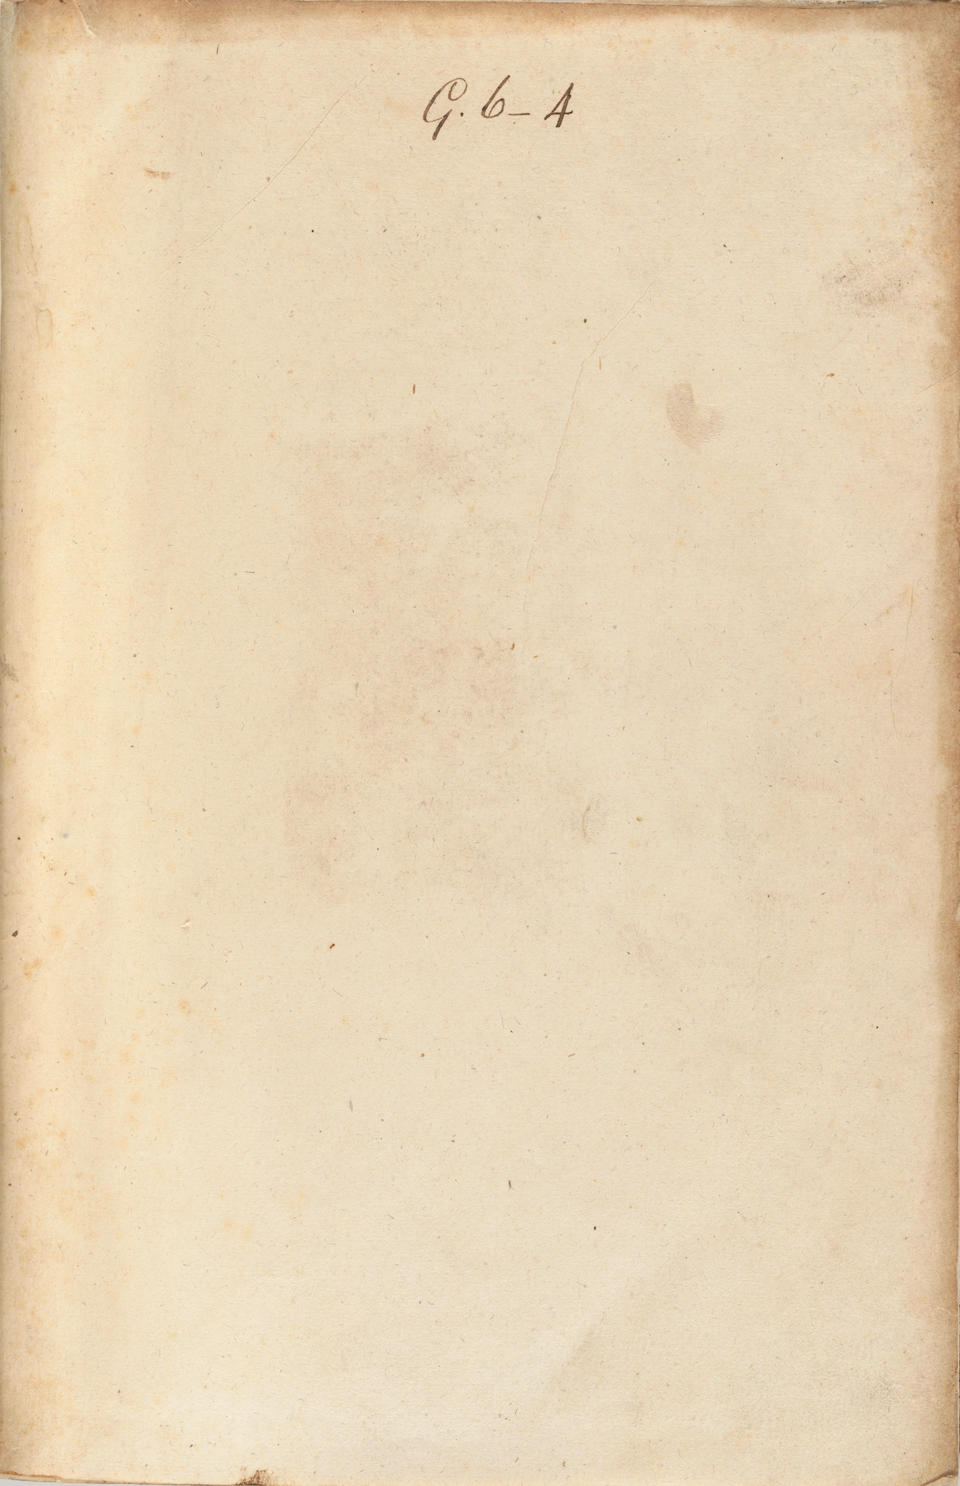 [DESCARTES] JOHN EVELYN'S COPY OF AN IMPORTANT WORK IN THE SPREAD OF CARTESIAN PHILOSOPHY. [DESC... - Image 8 of 9